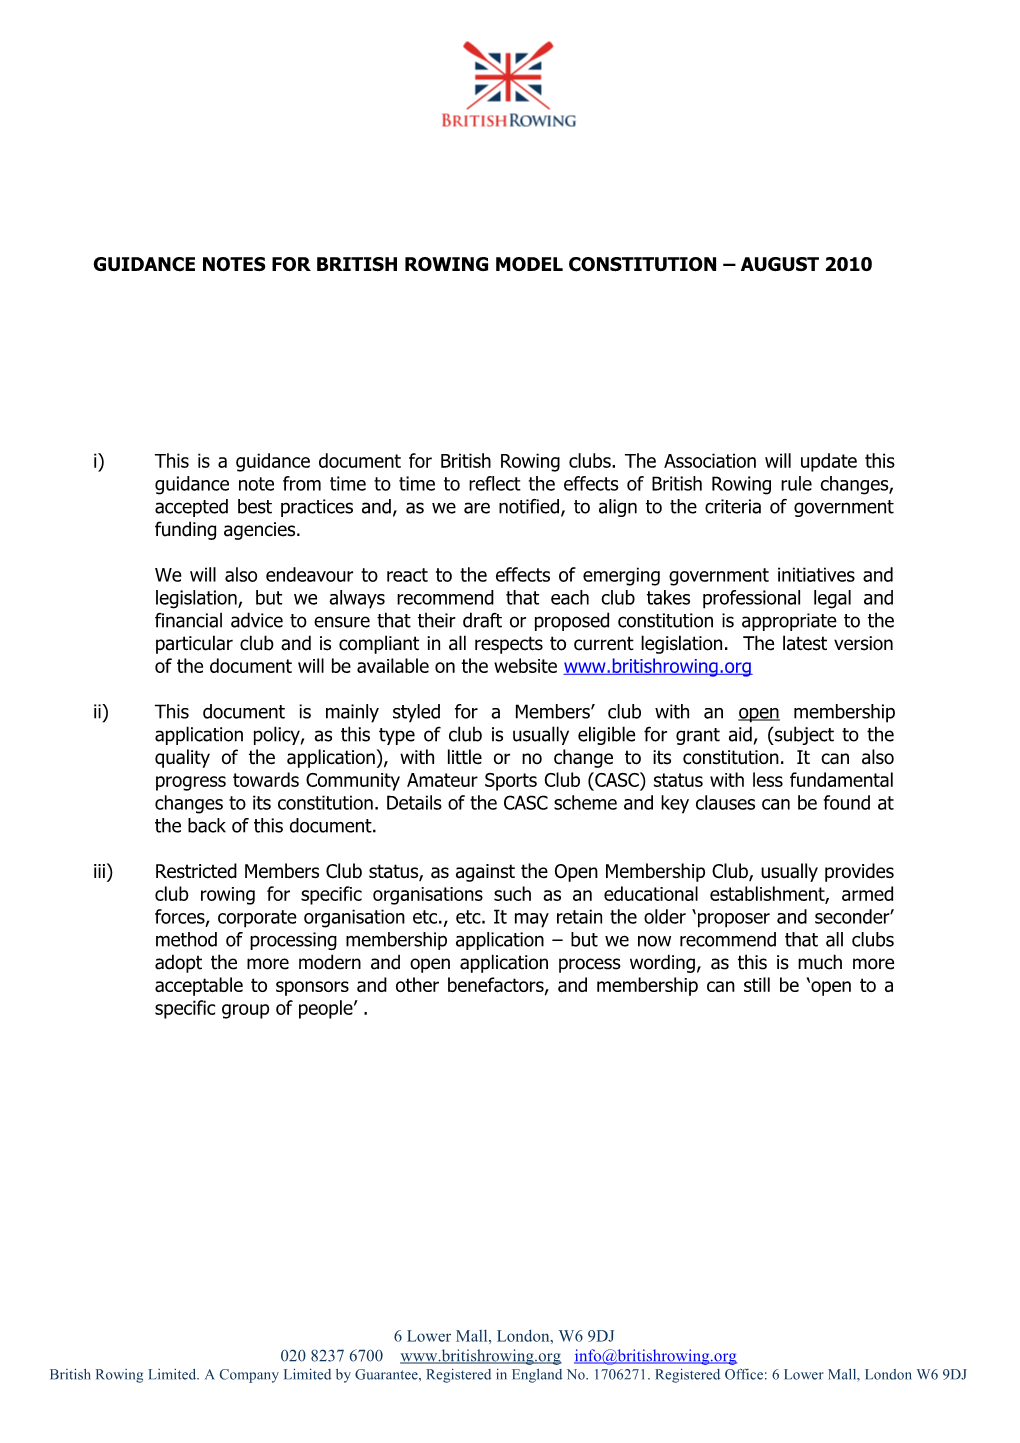 Guidance Notes for British Rowing Model Constitution August 2010